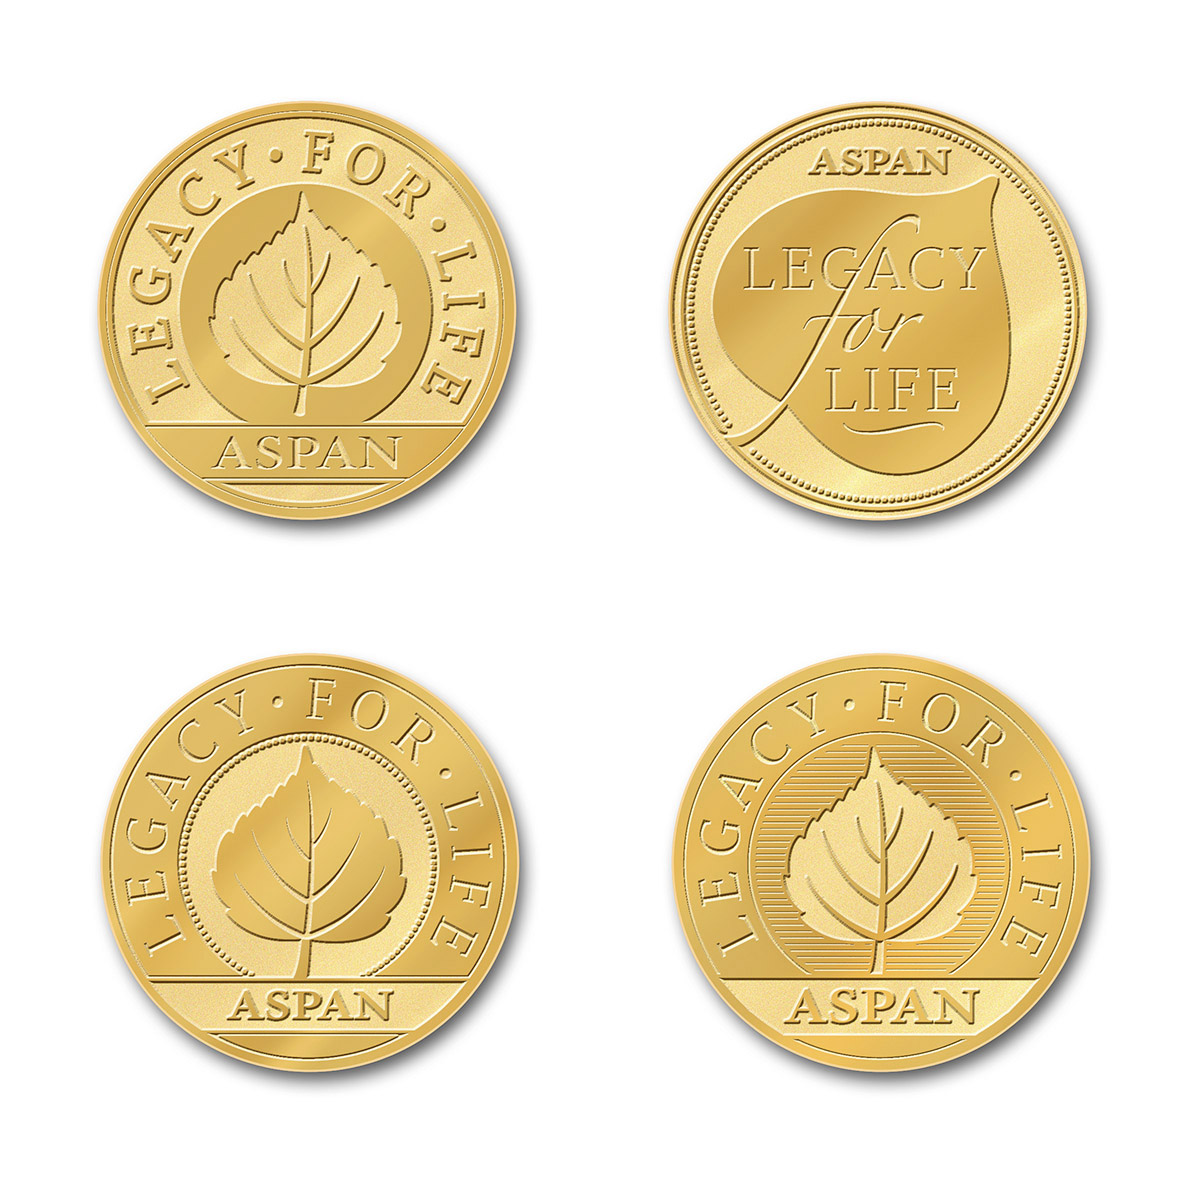 aspan Legacy for Life Medal Concepts